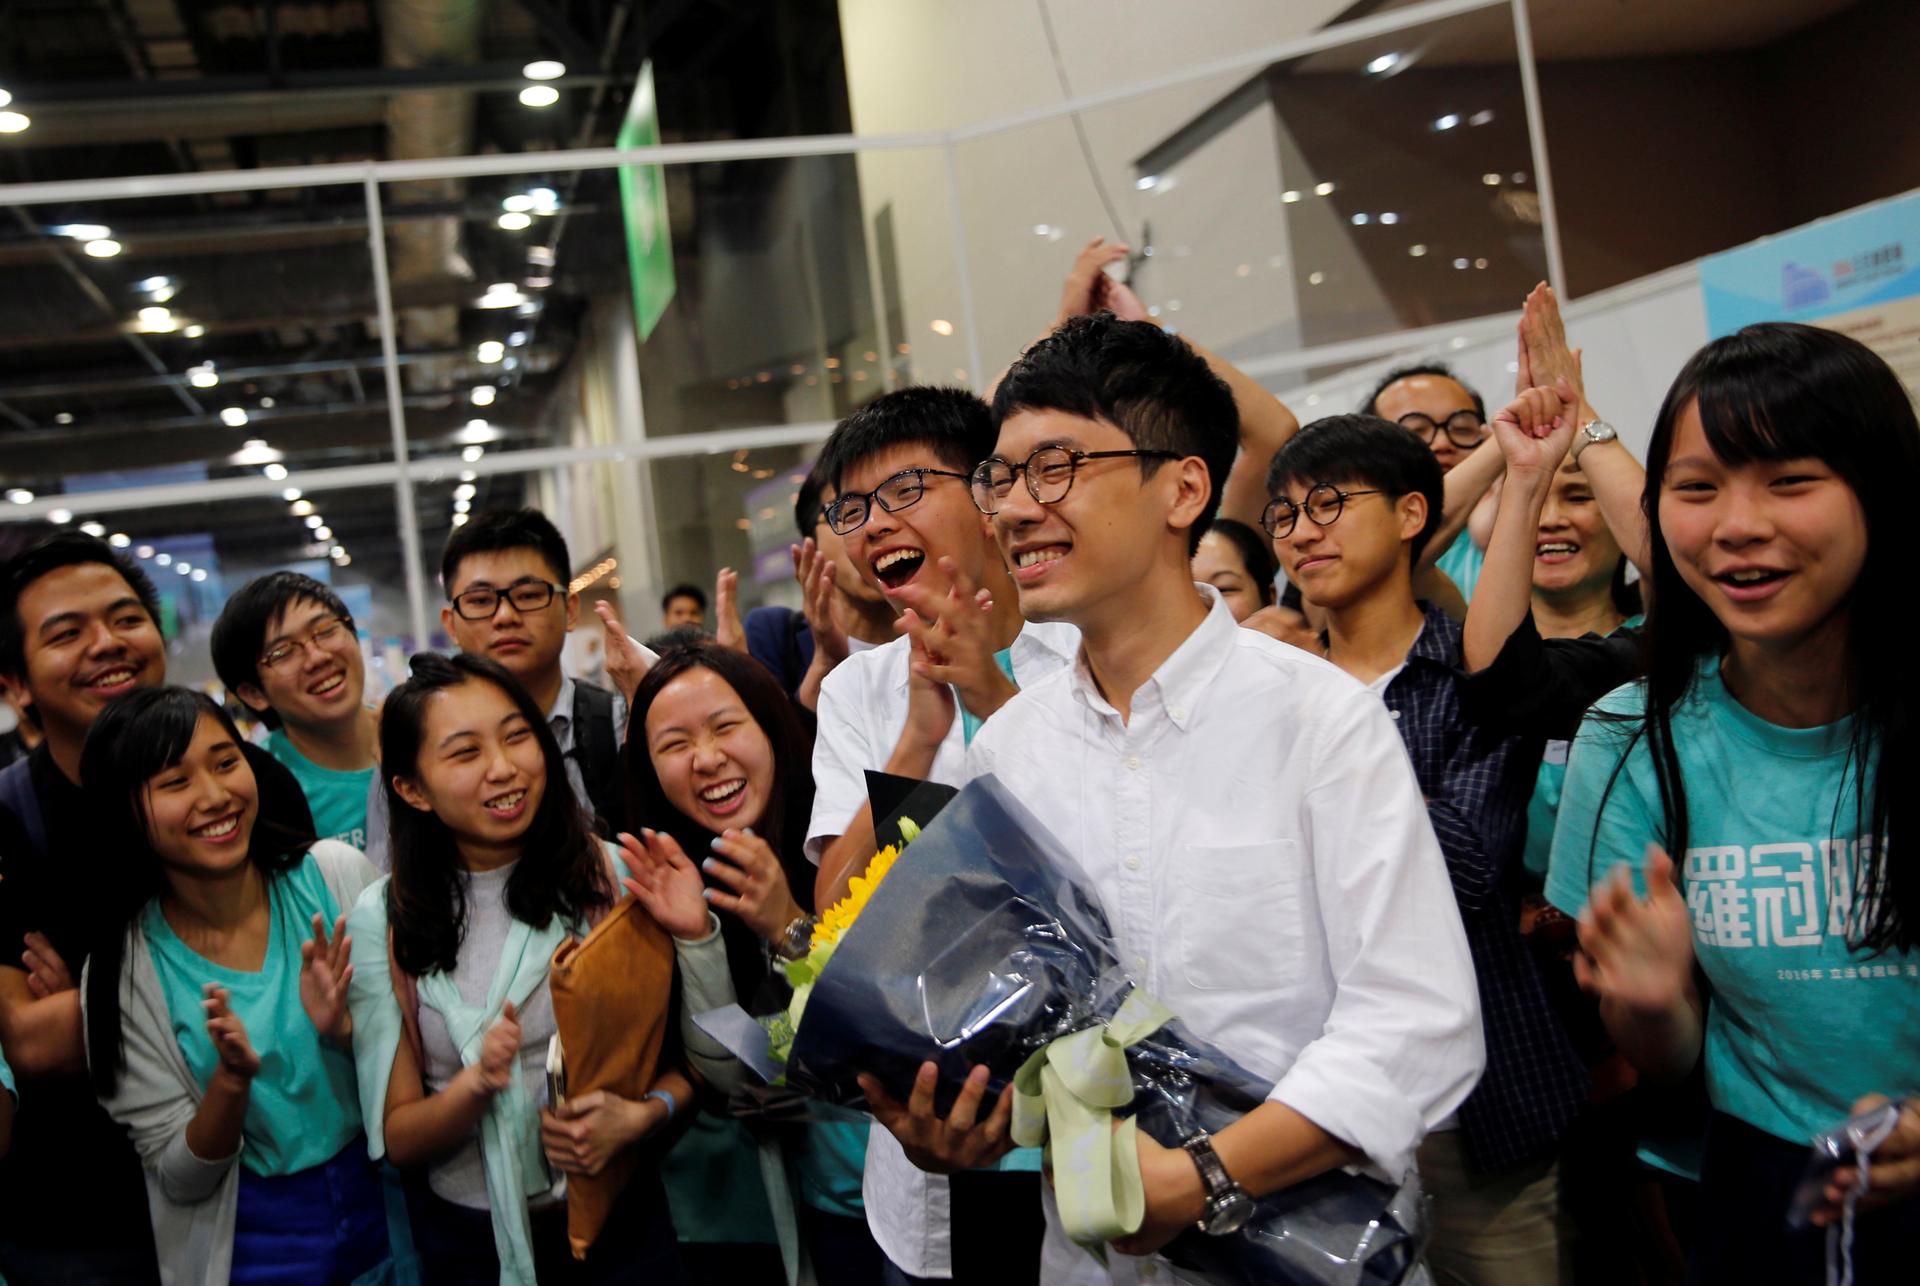 Student leader Joshua Wong (C) greets candidate Nathan Law (2nd R) as supporters share their joy after Law won in the Legislative Council election in Hong Kong, China September 5, 2016.